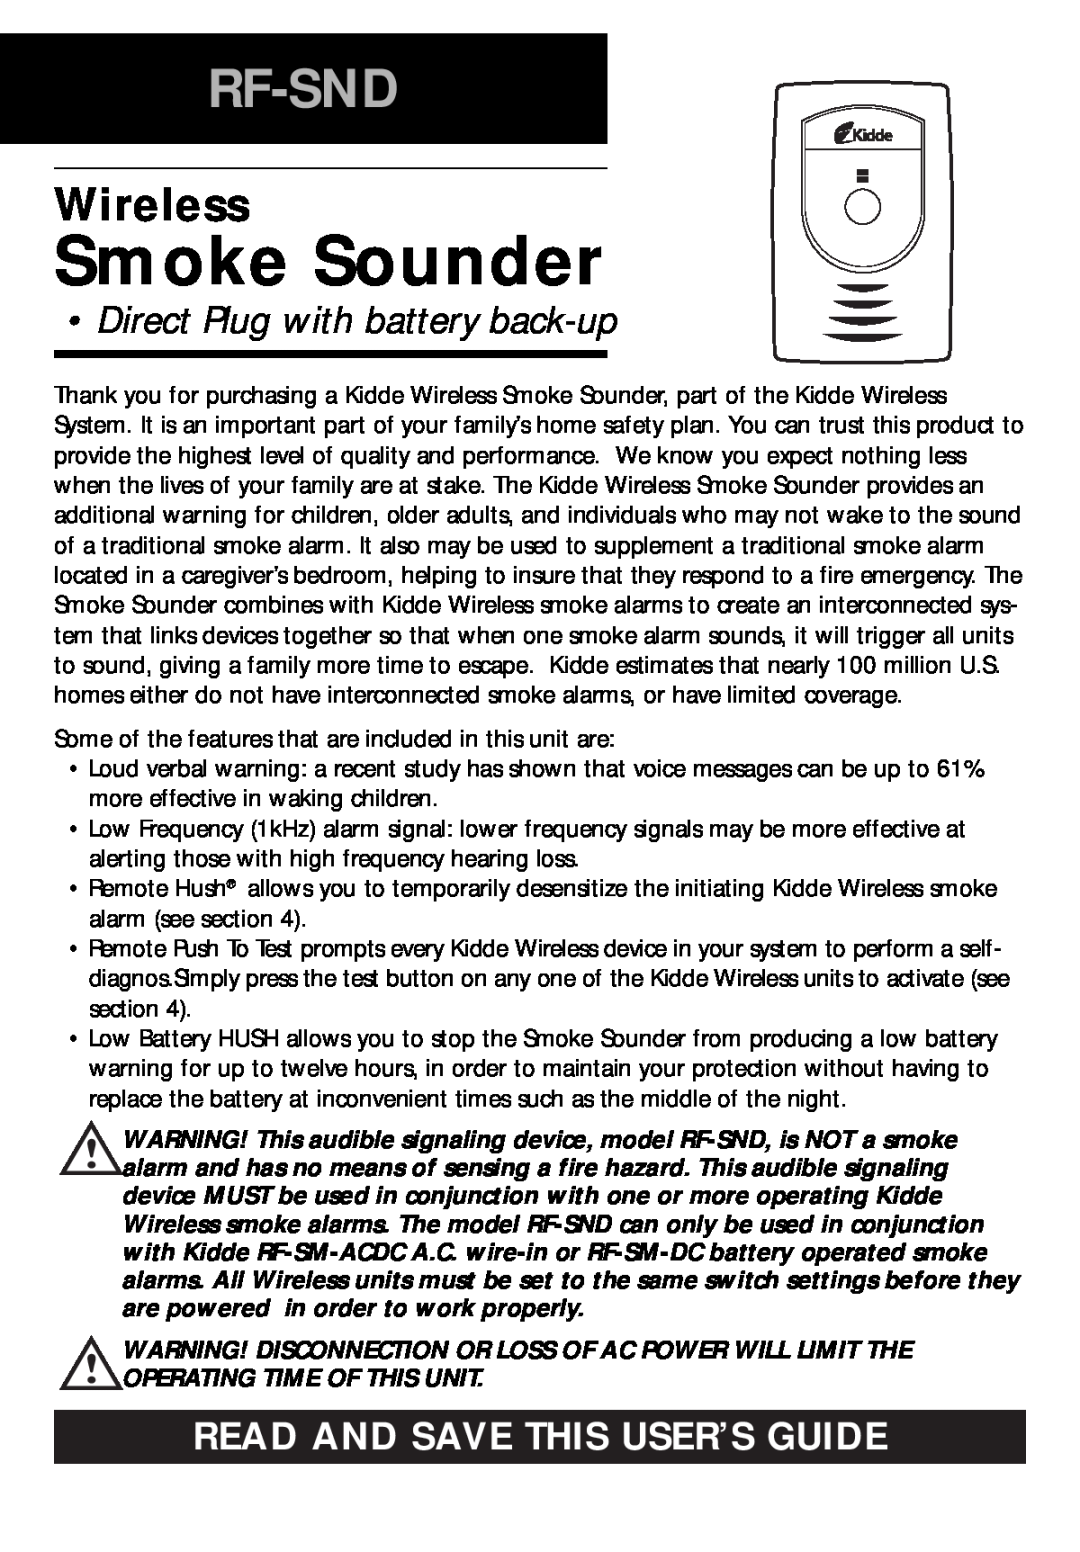 Kidde RF-SND manual Smoke Sounder, Rf-Snd, Wireless, Direct Plug with battery back-up, Read And Save This User’S Guide 